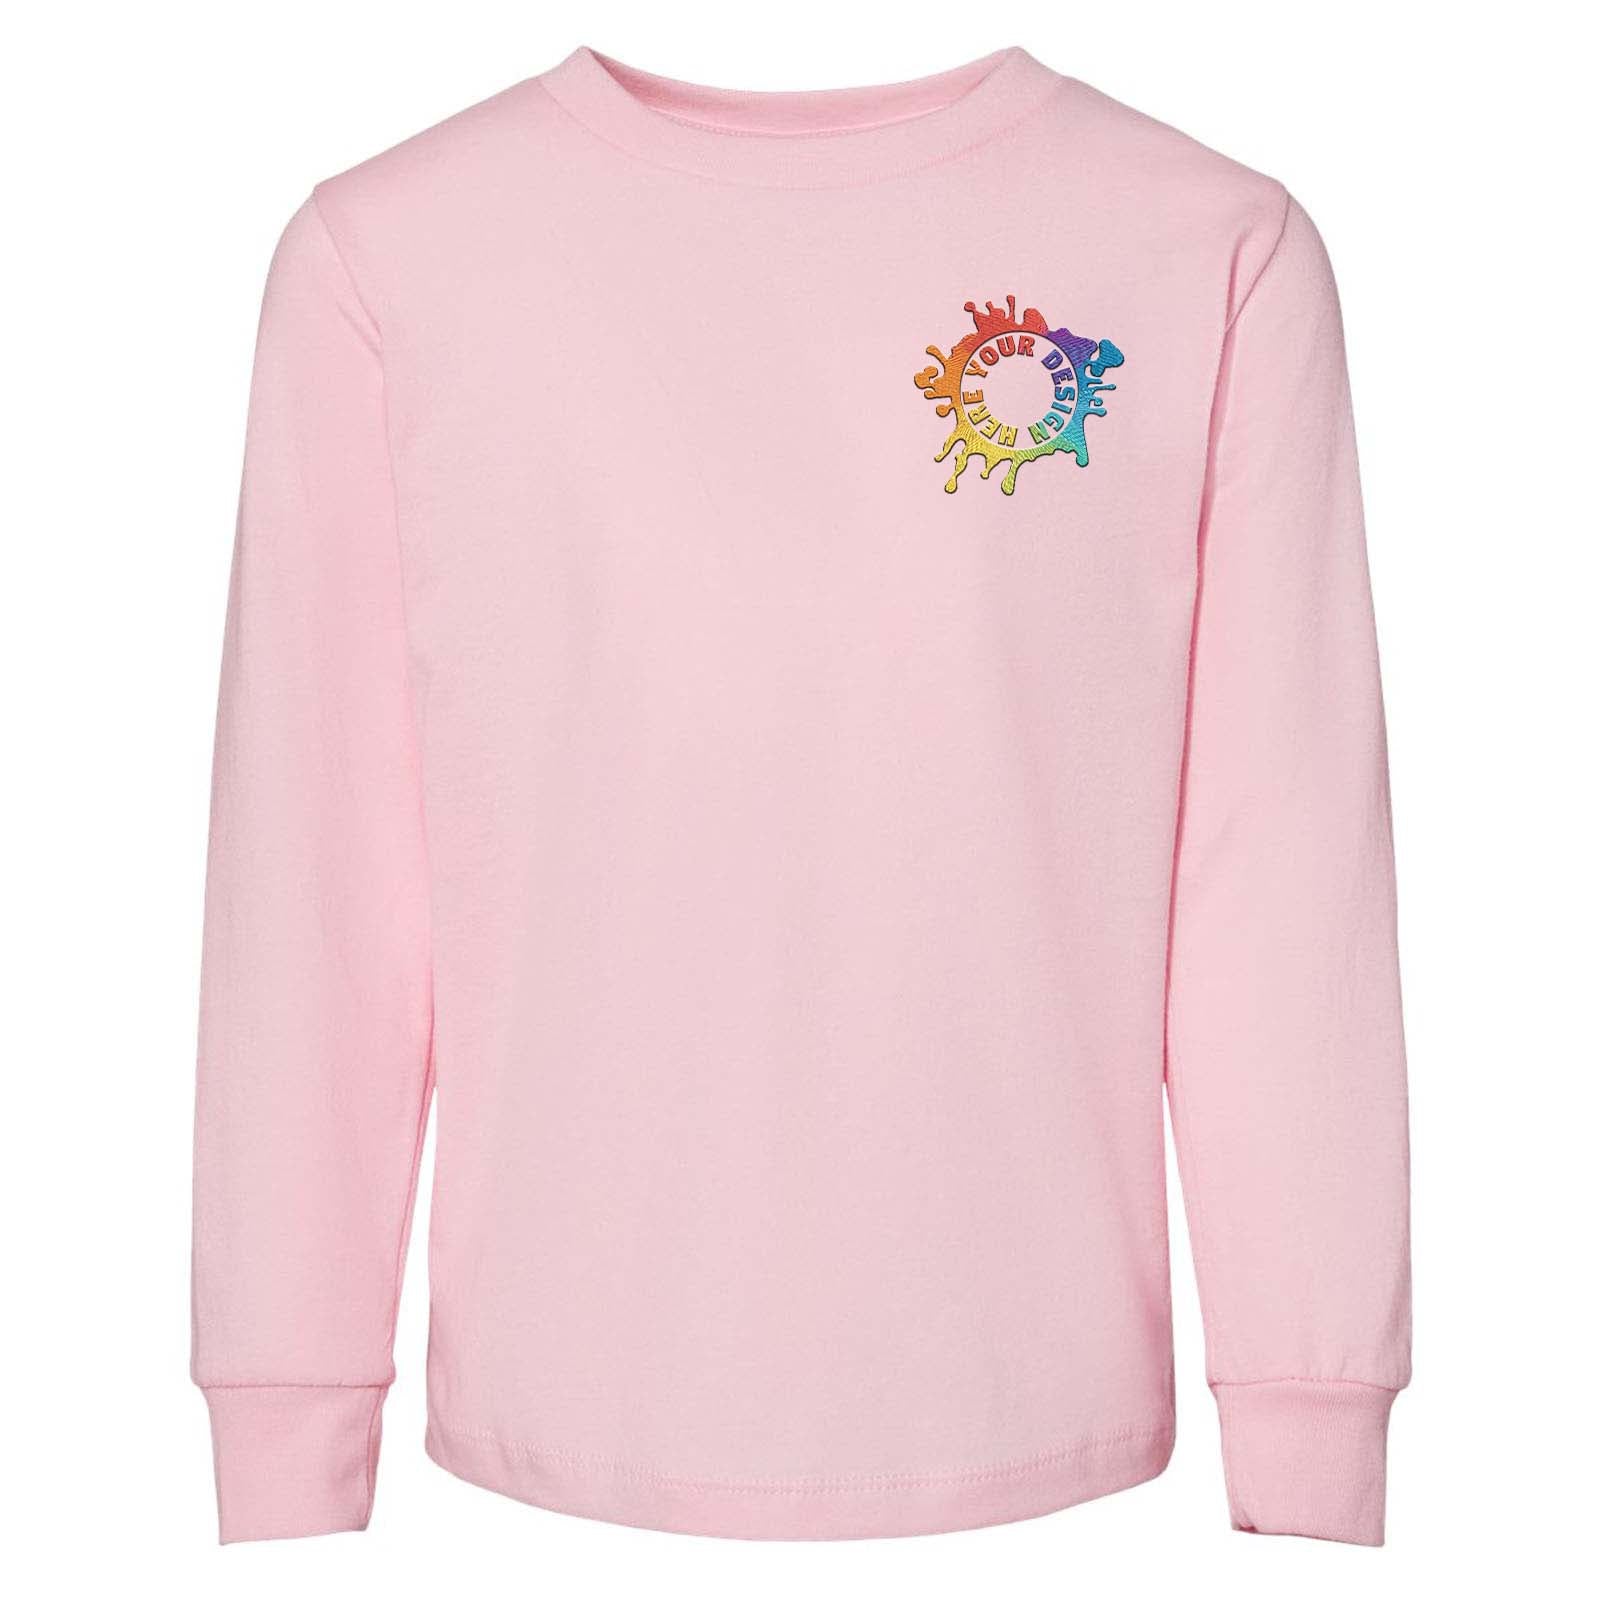 Bella + Canvas Toddler Unisex 100% Cotton Long Sleeve T-Shirt Embroidery